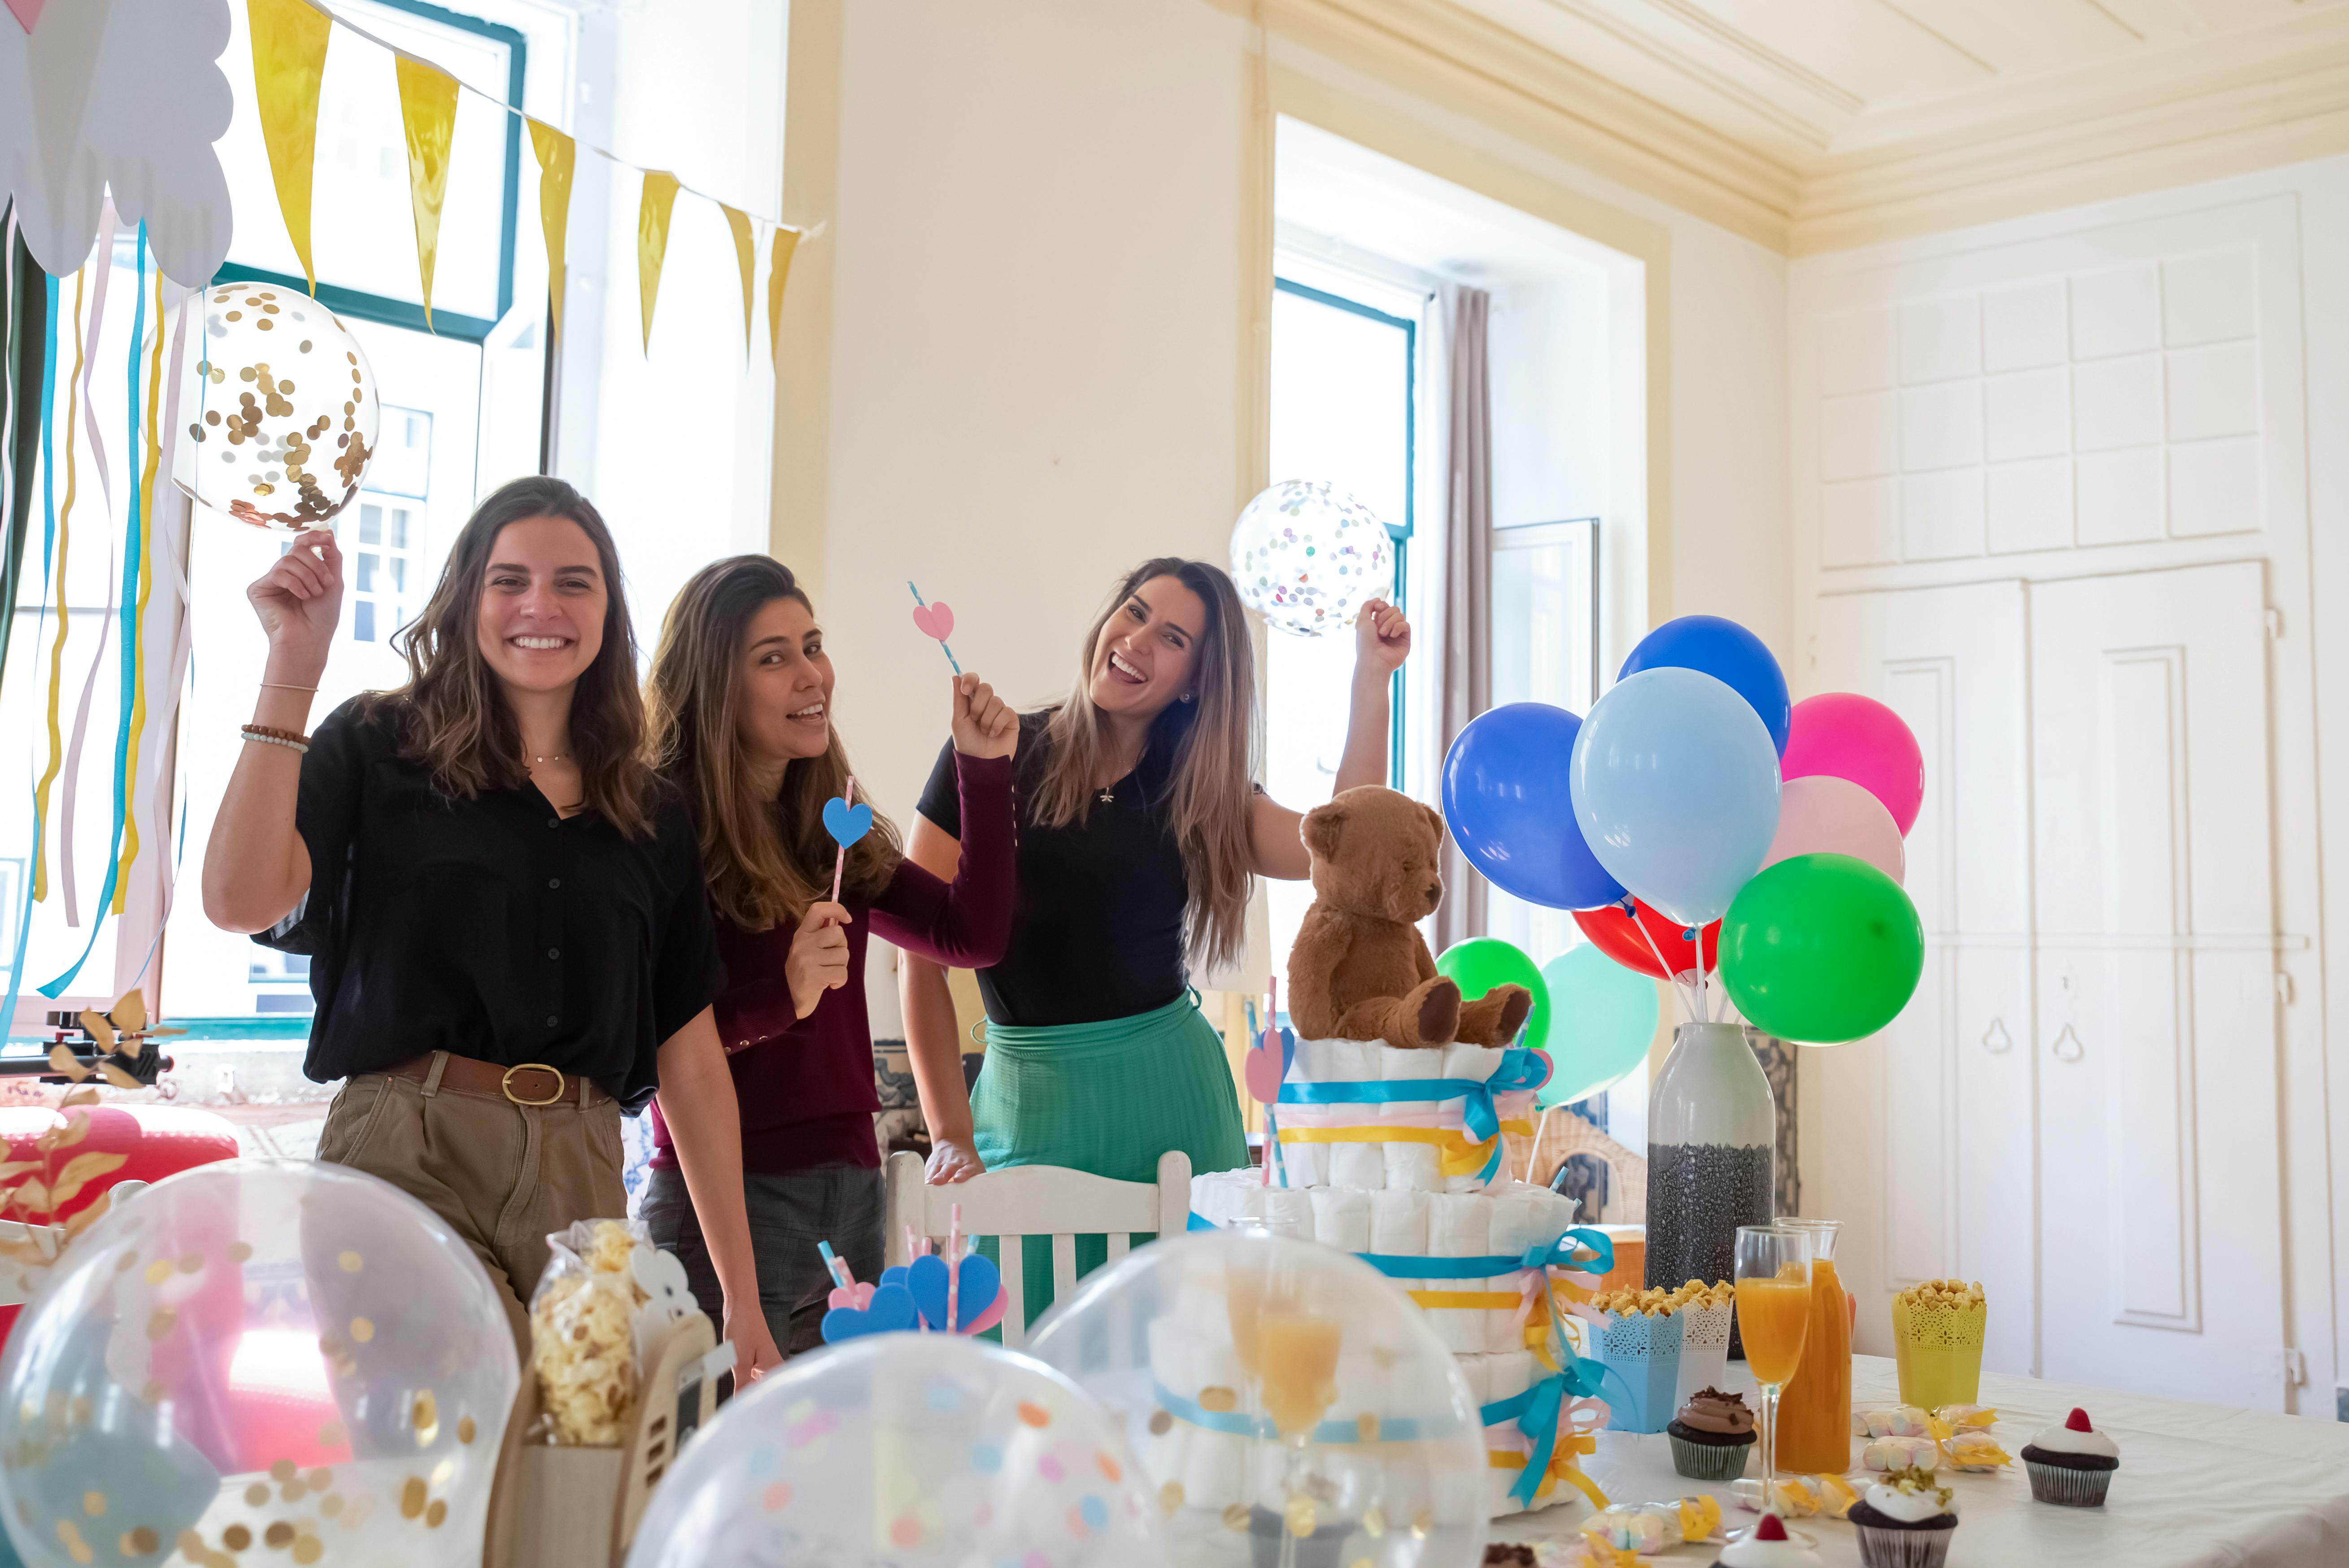 Friends at a baby shower | Source: Pexels